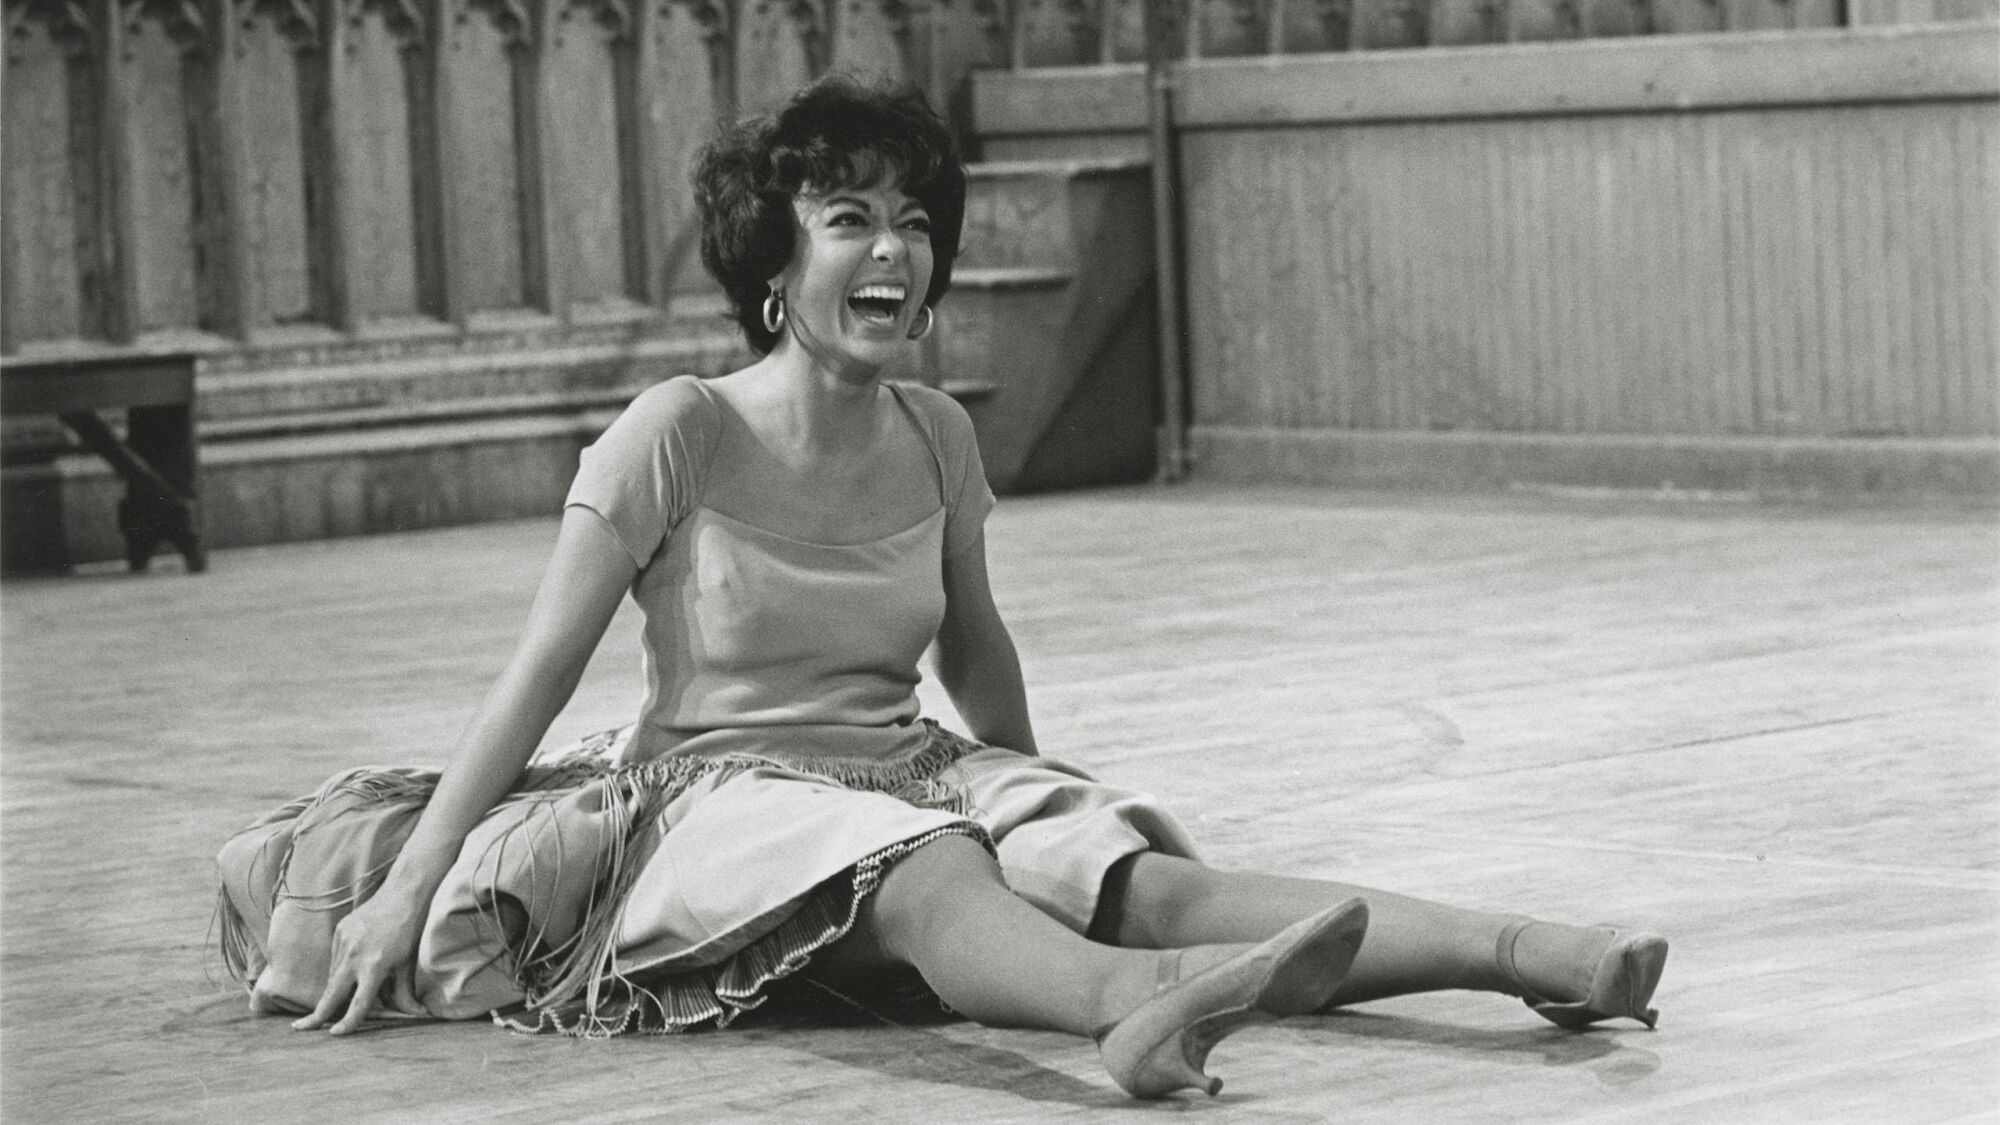 Rita Moreno in a still from "West Side Story."